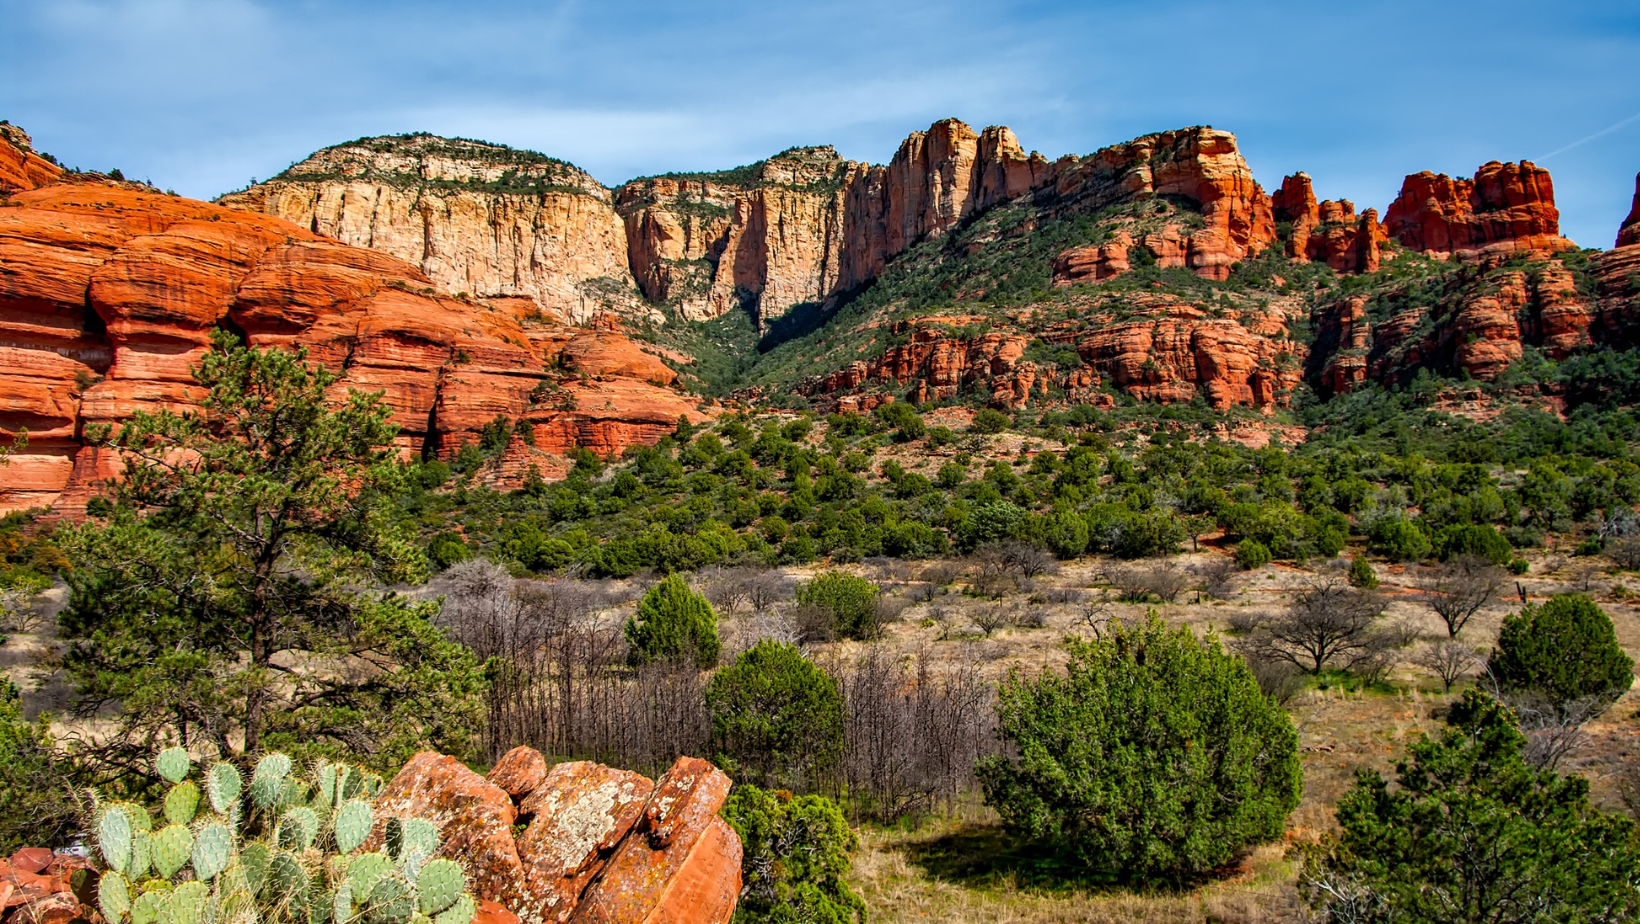 A scenic view of Arizona desert landscape in the spring with tall red plateaus and green cacti